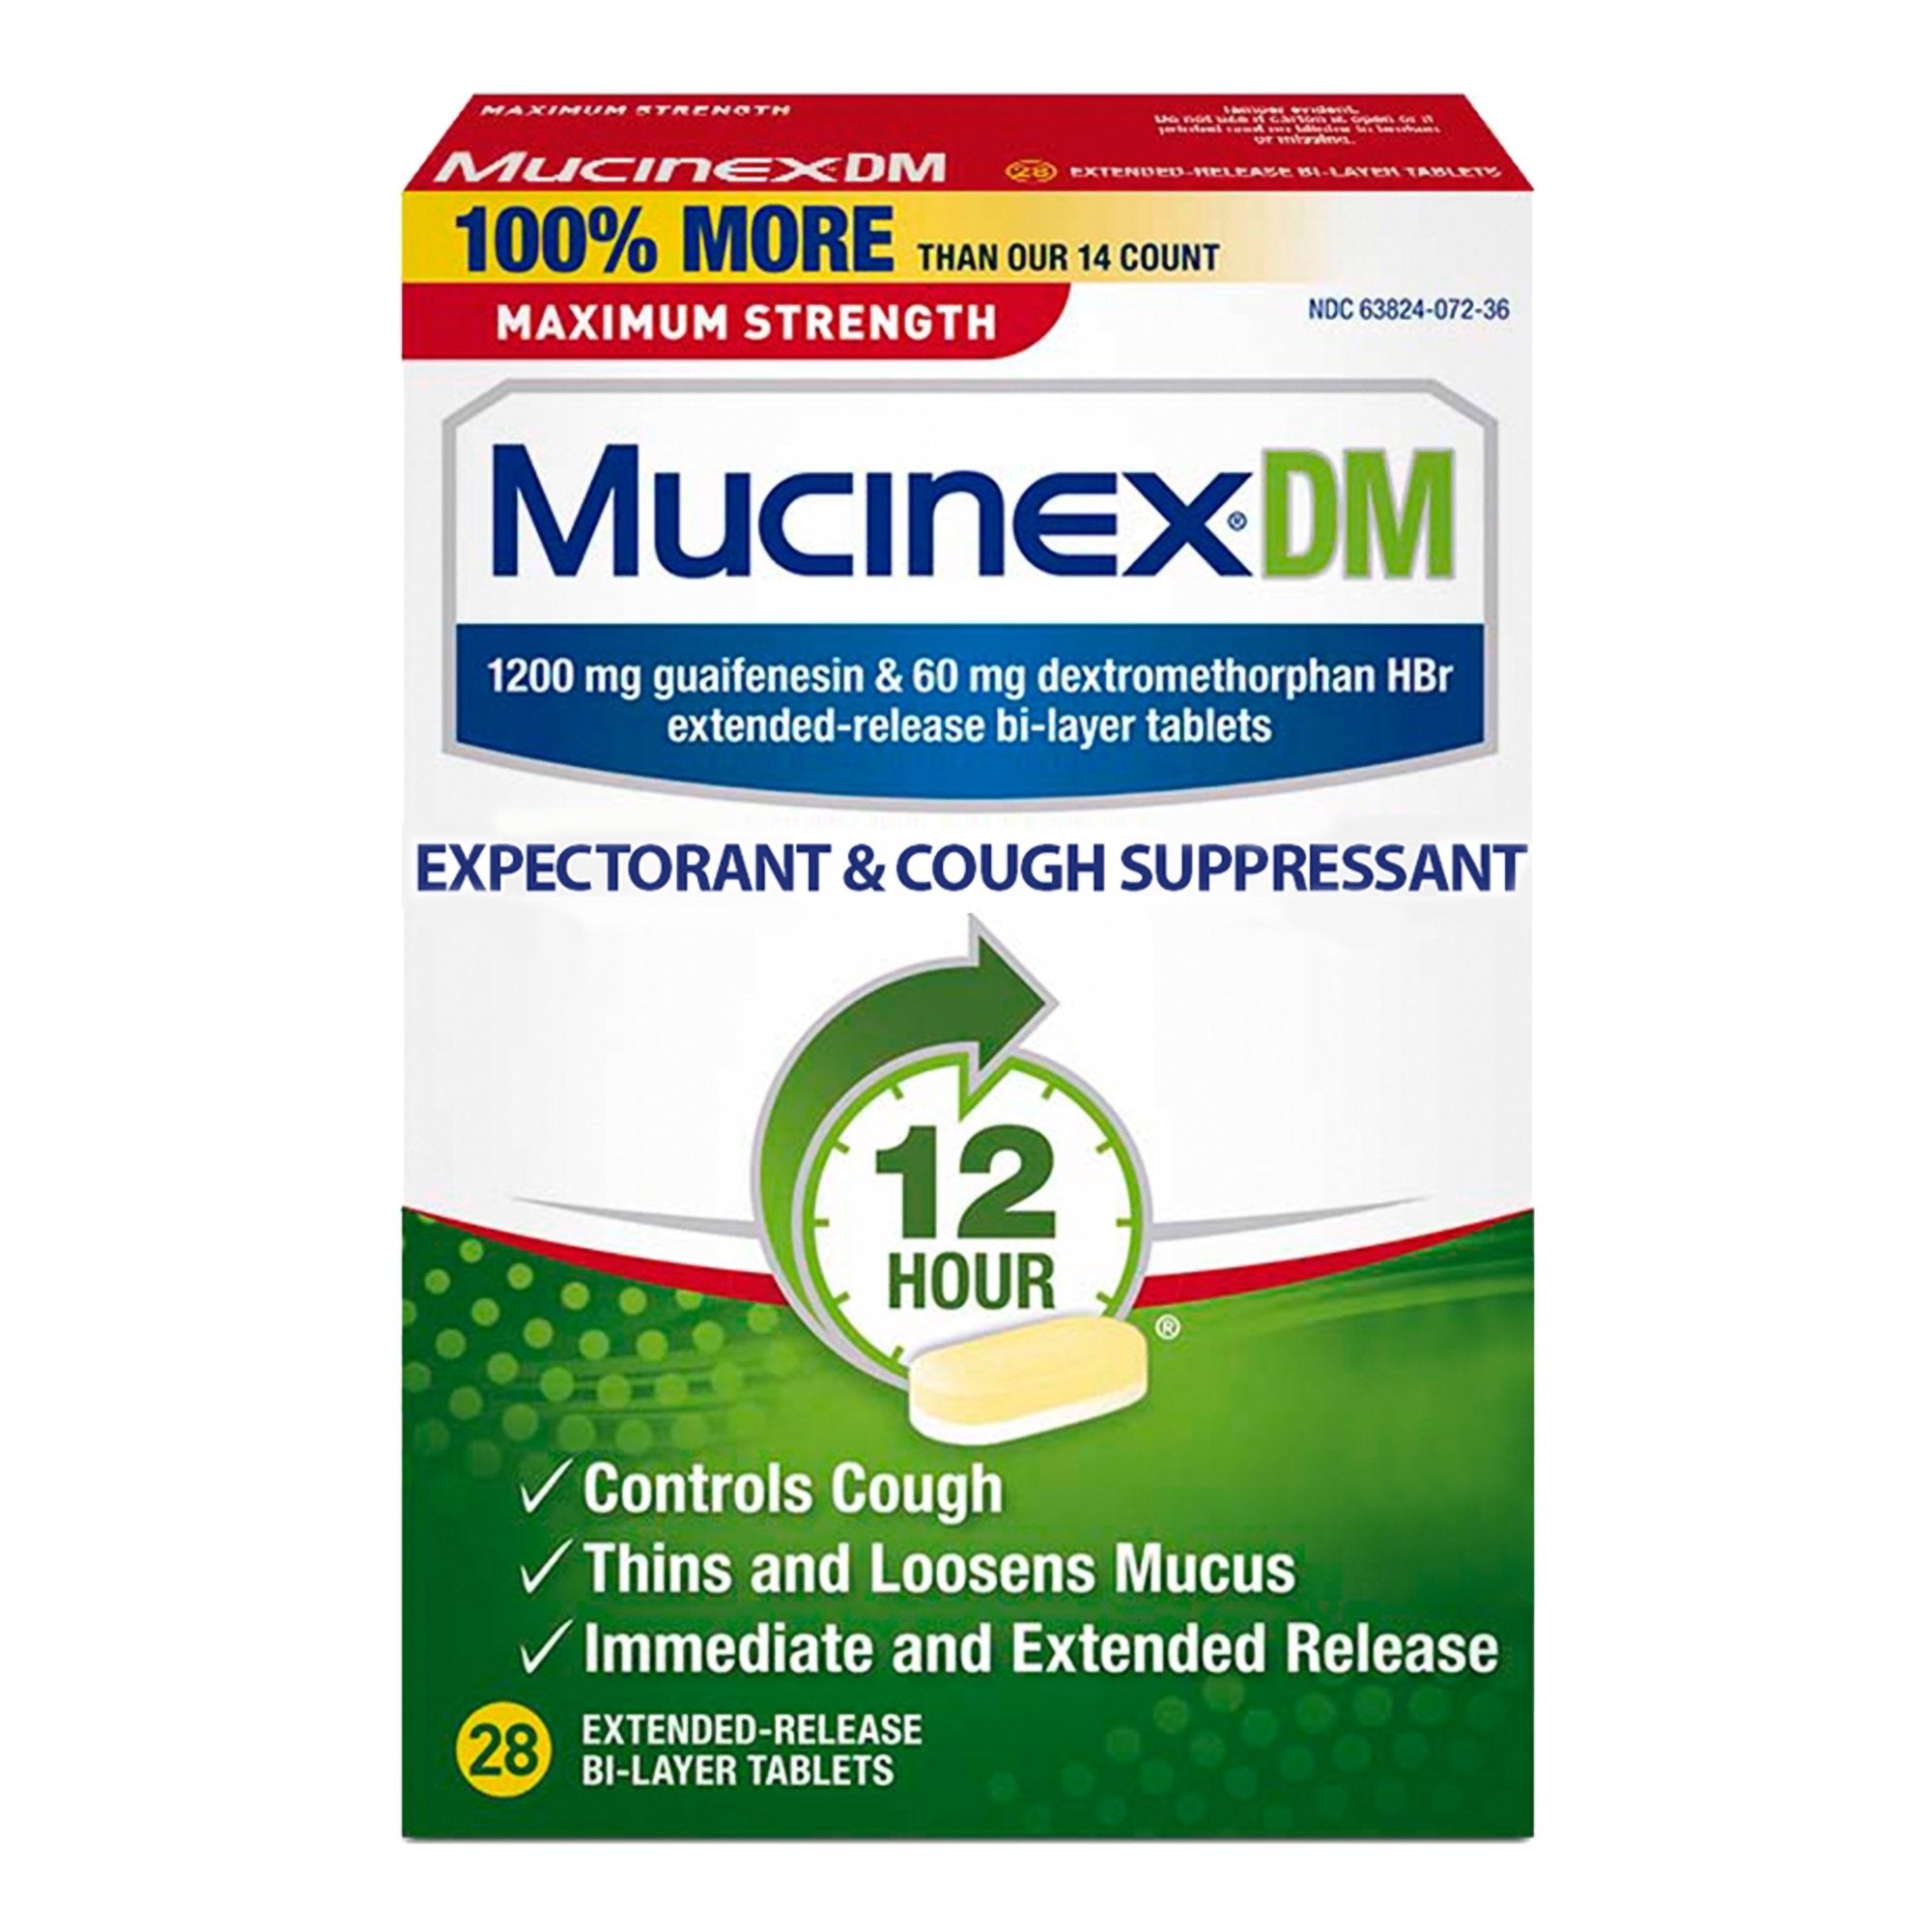 Cold and Cough Relief Mucinex® DM 1,200 mg - 60 mg Strength Tablet 28 per Box